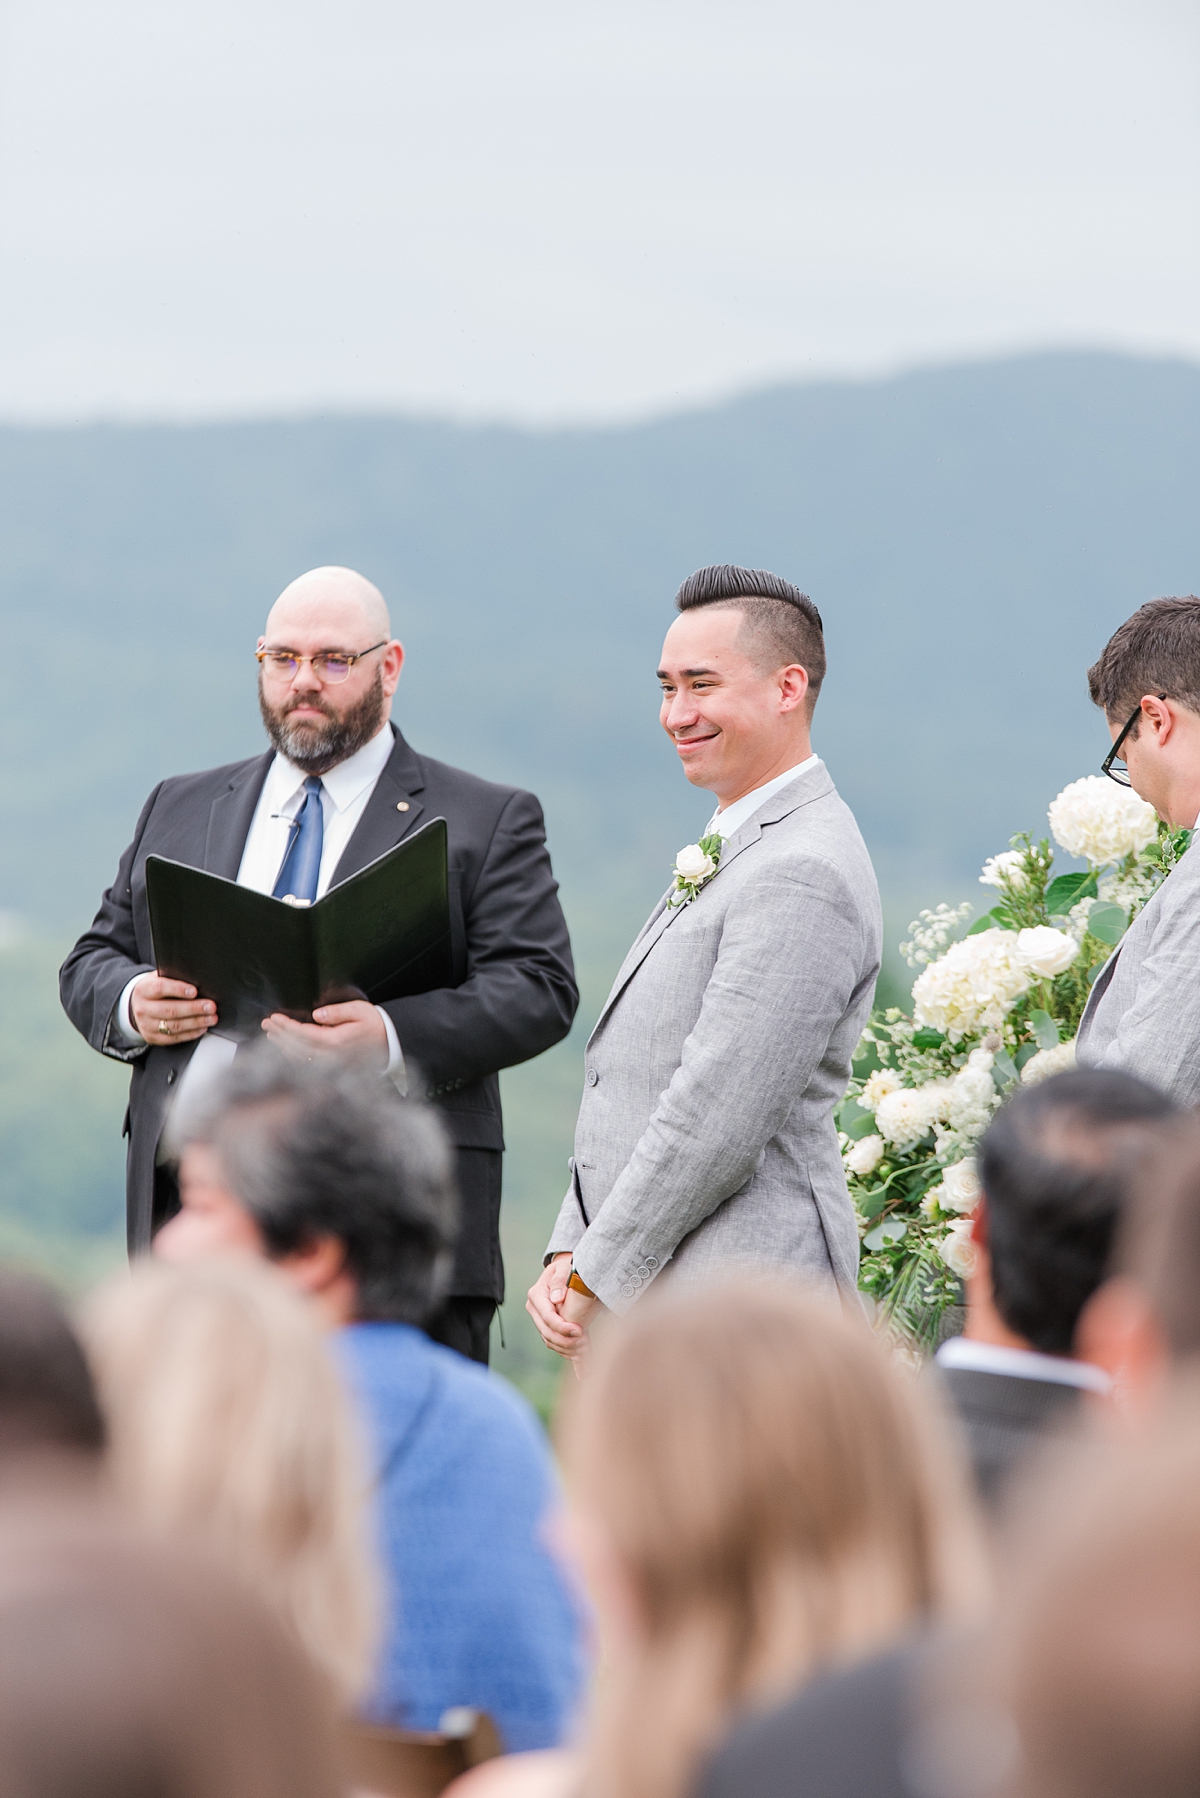 Groom Seeing the Bride During Ceremony at a Timeless Grace Estate Winery Wedding. Wedding Photography by Virginia Wedding Photographer Kailey Brianne Photography.